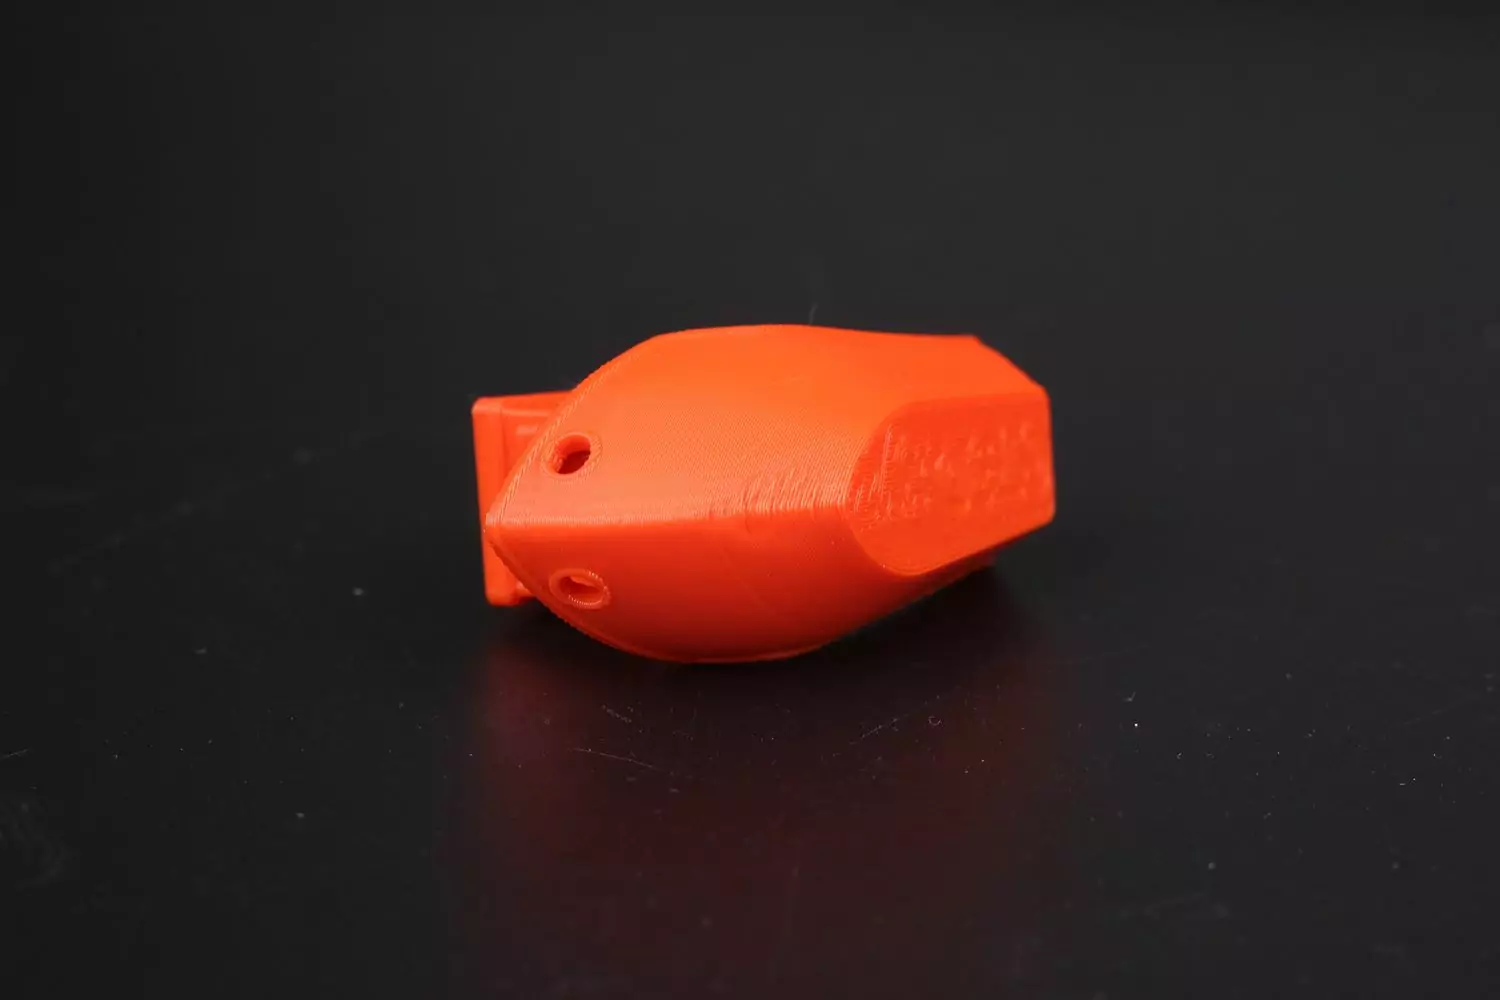 3D benchy printed on Ender 3 S1 Pro with Klipper and Sonic Pad3 | Creality Sonic Pad Review: Klipper Firmware with Compromises